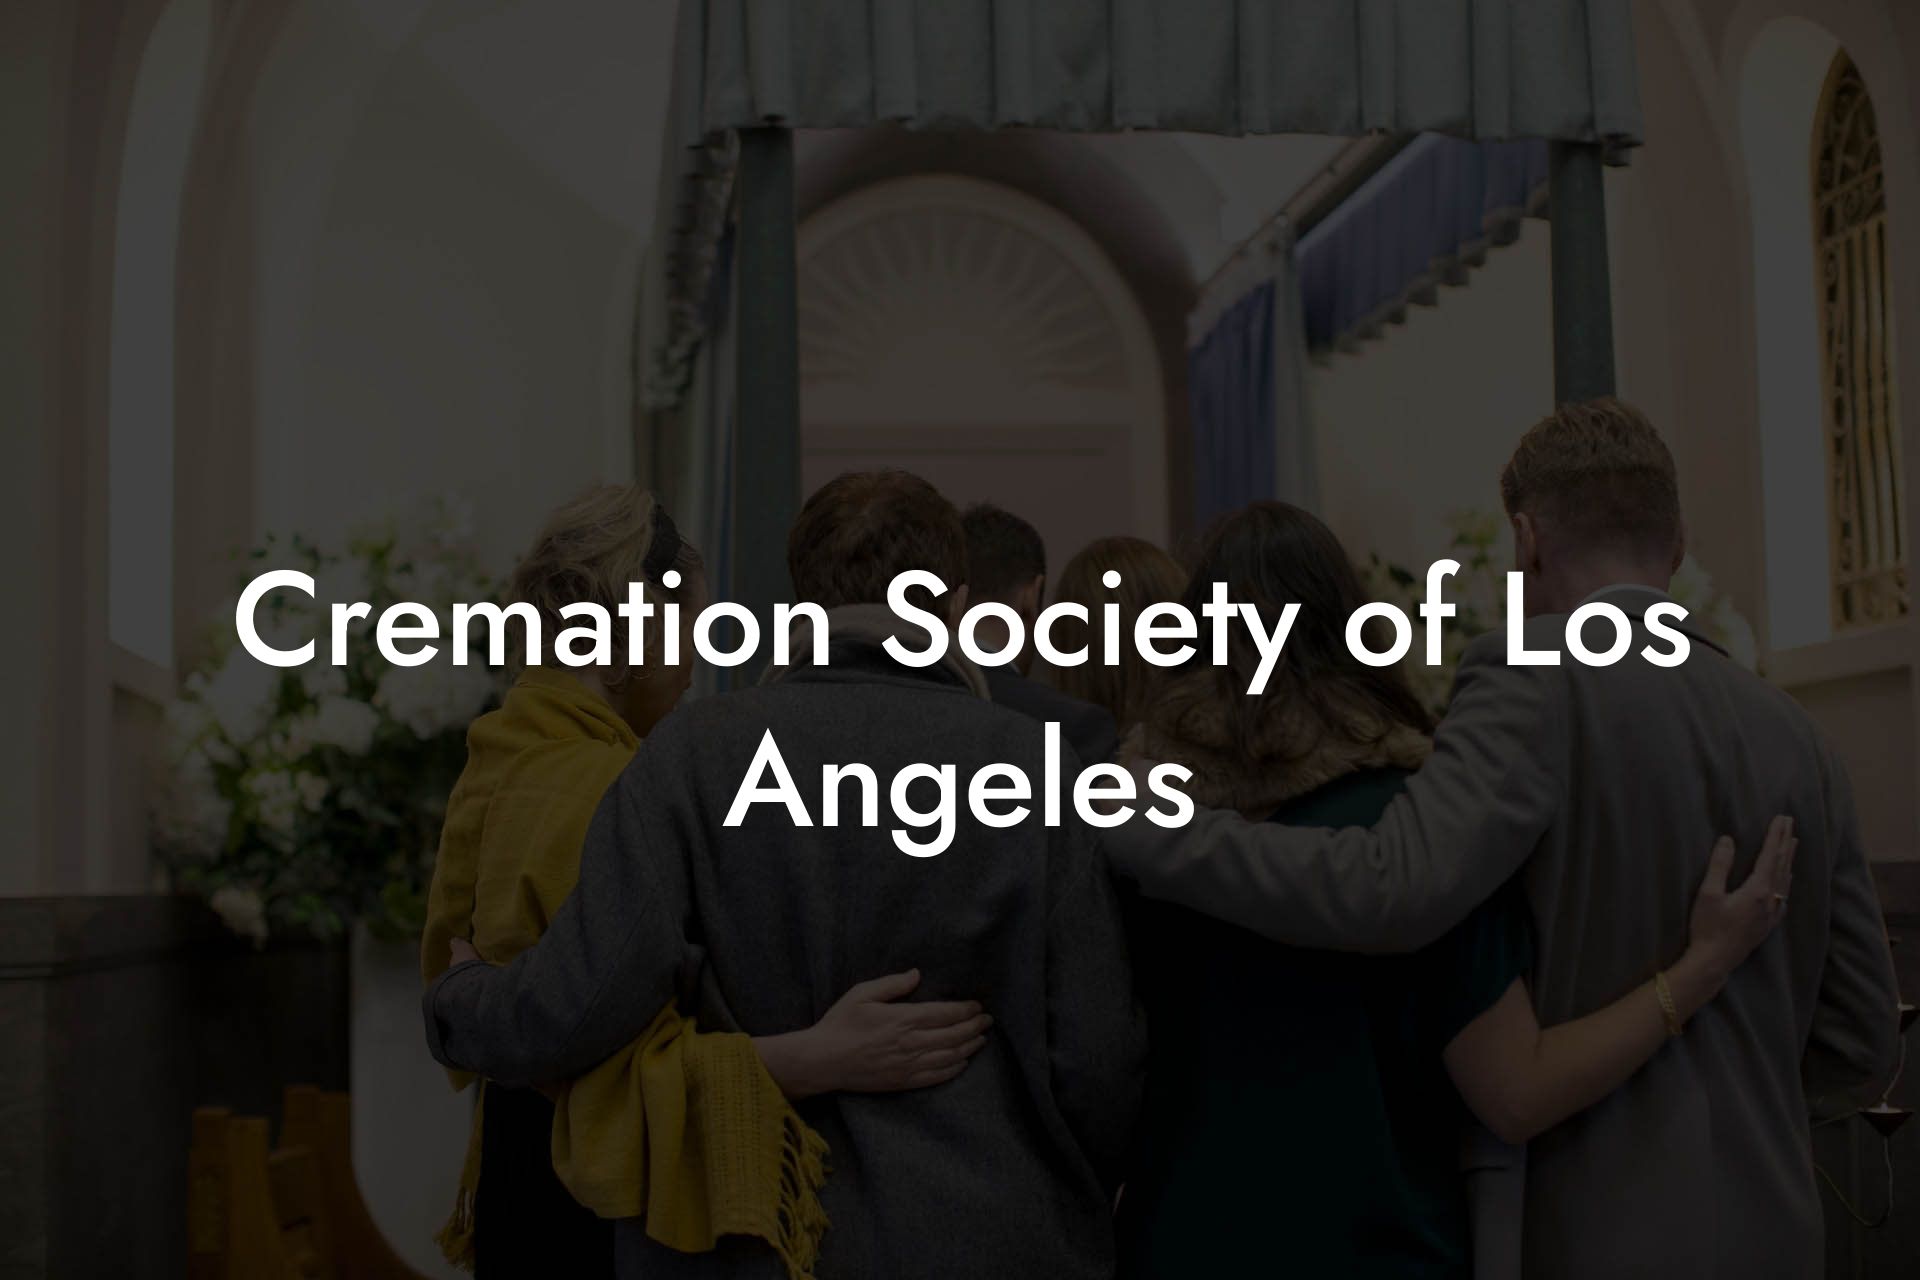 Cremation Society of Los Angeles